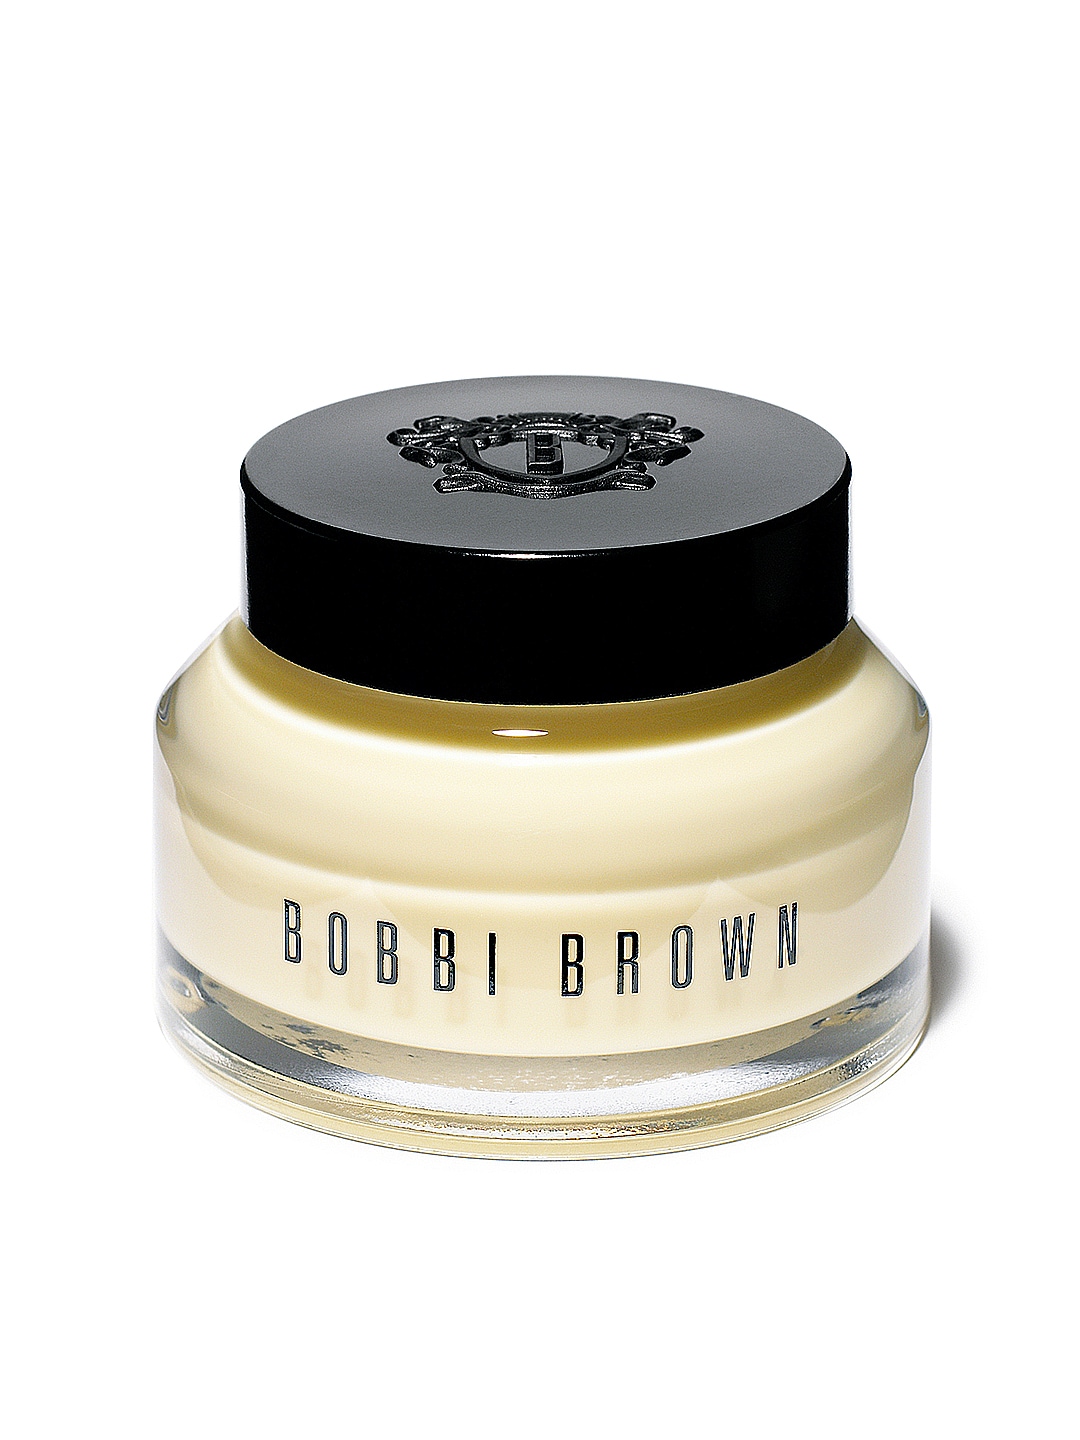 Bobbi Brown Vitamin Enriched Face Base for Normal to Oily Skin 50 ml Price in India